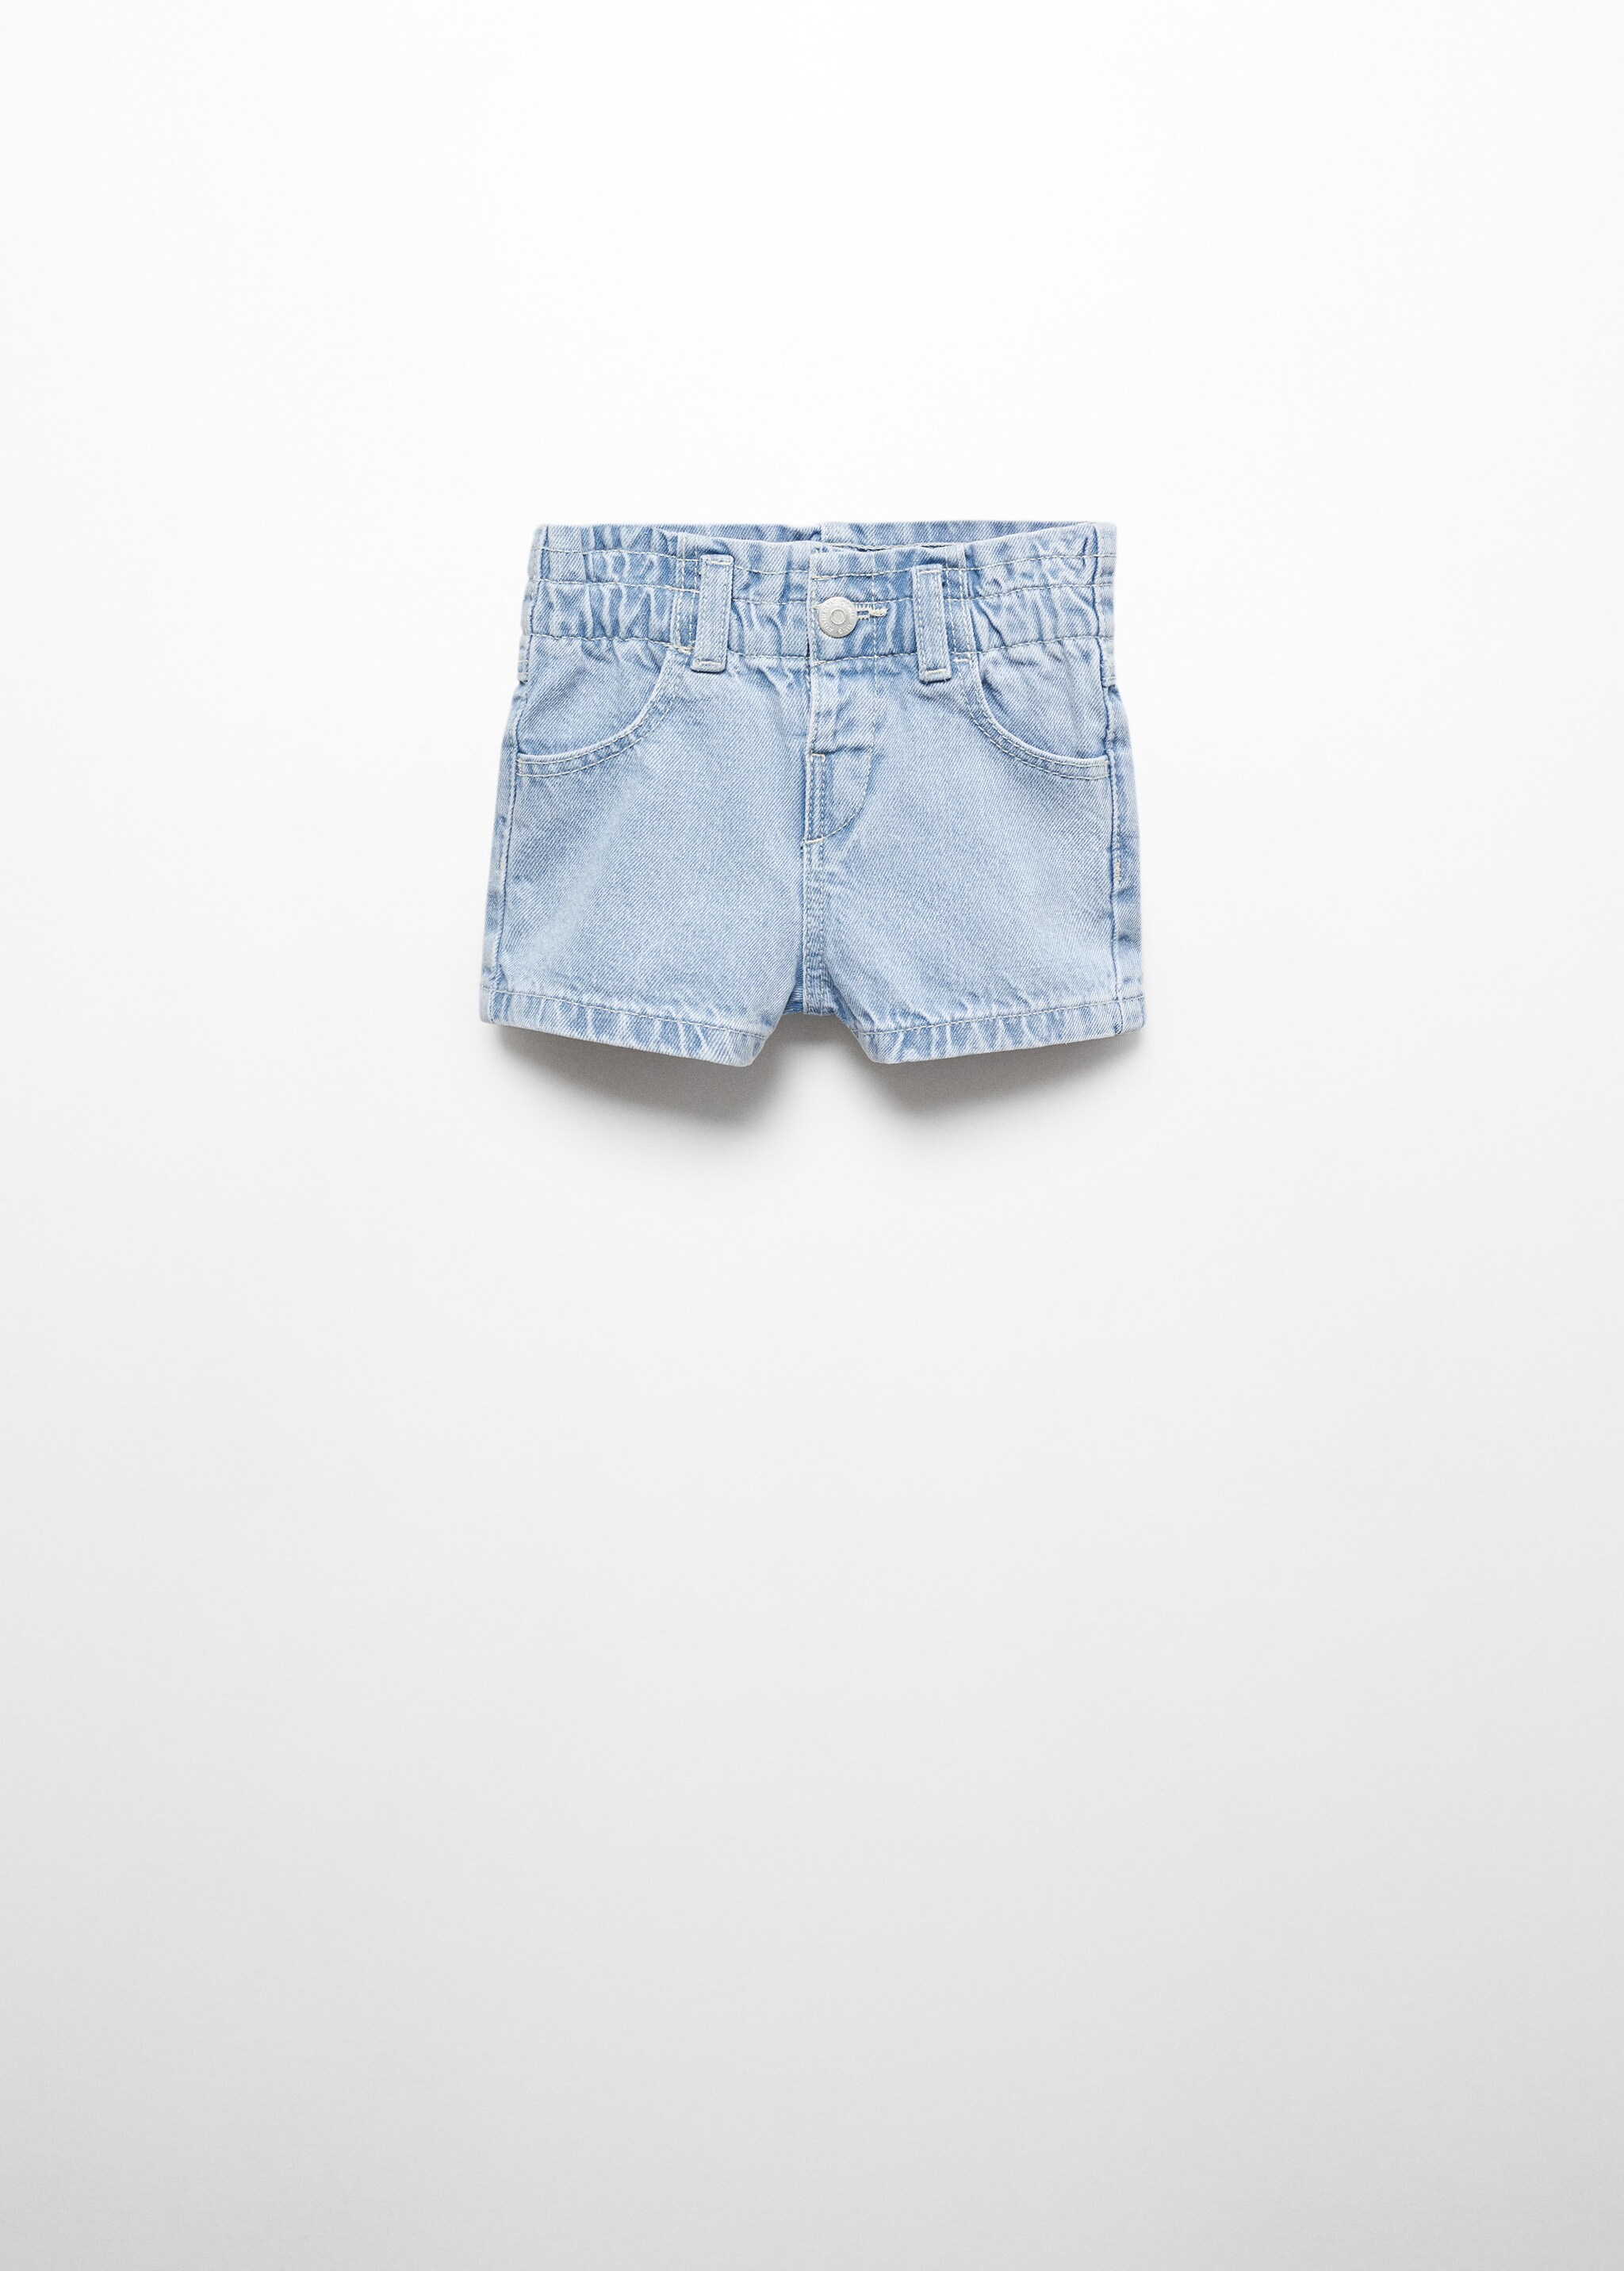 Paperbag denim shorts - Article without model